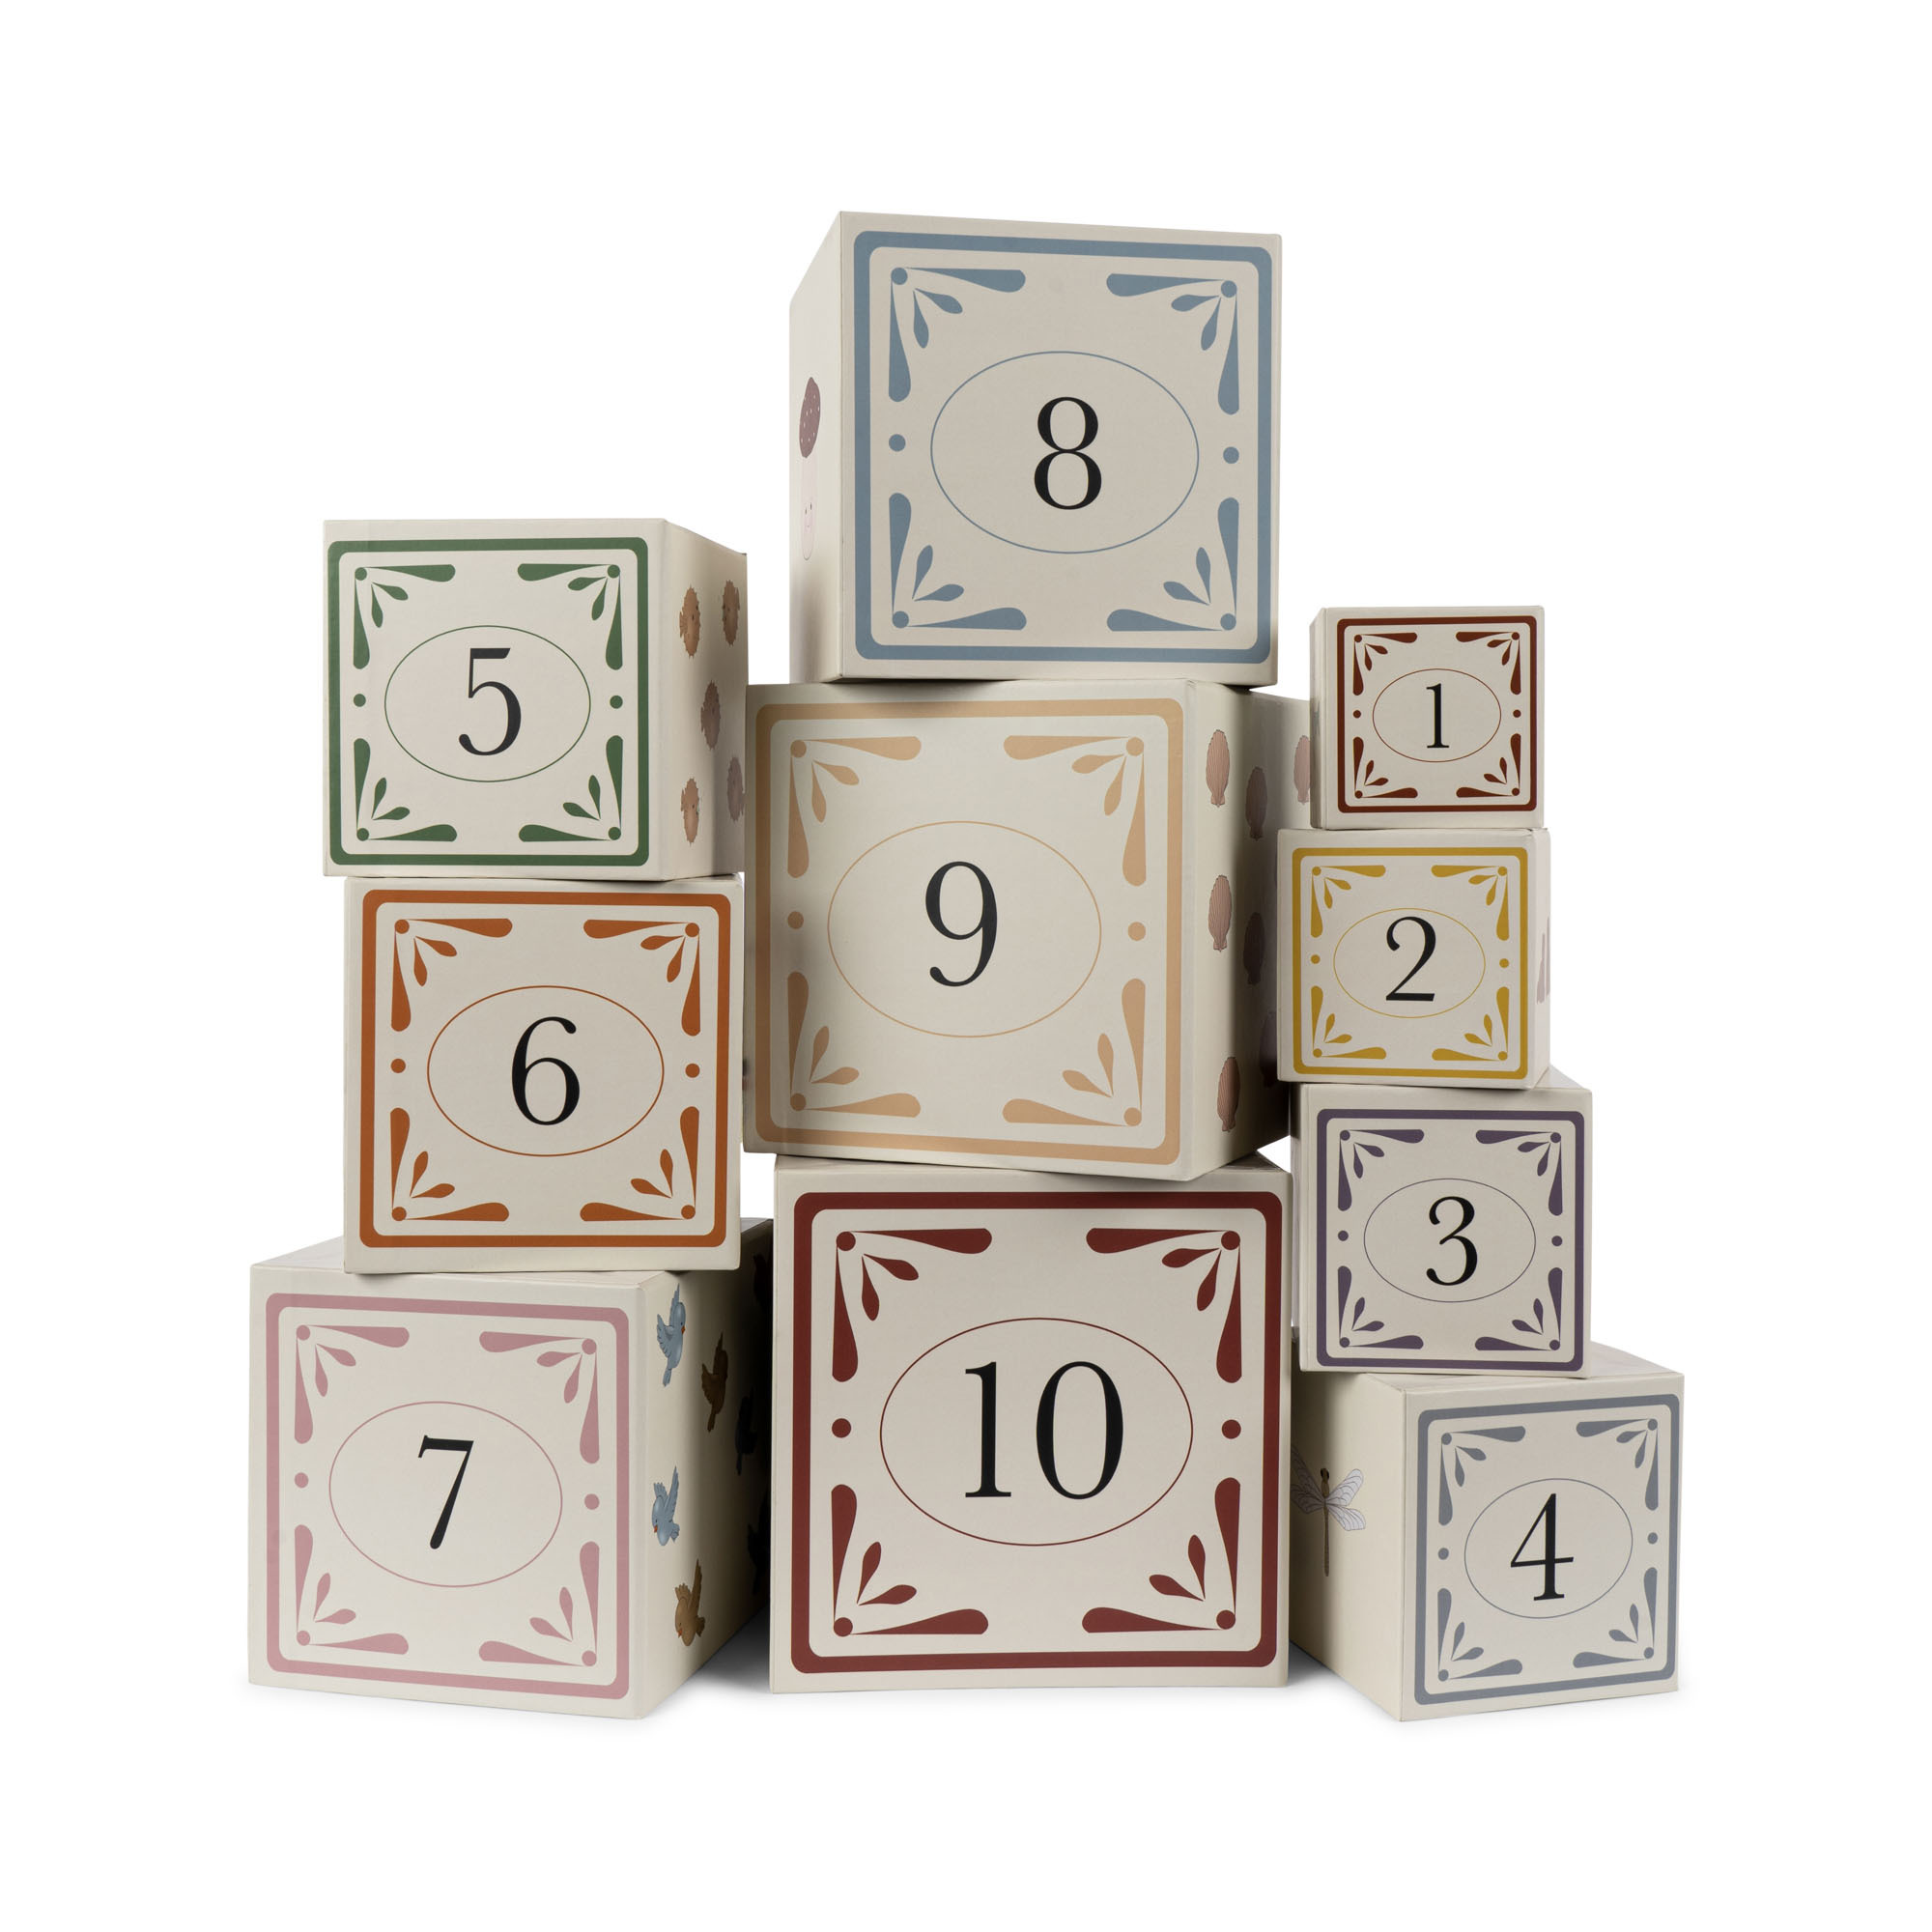 KS5284 - NUMBERS STACKING BOXES - MULTI - Main